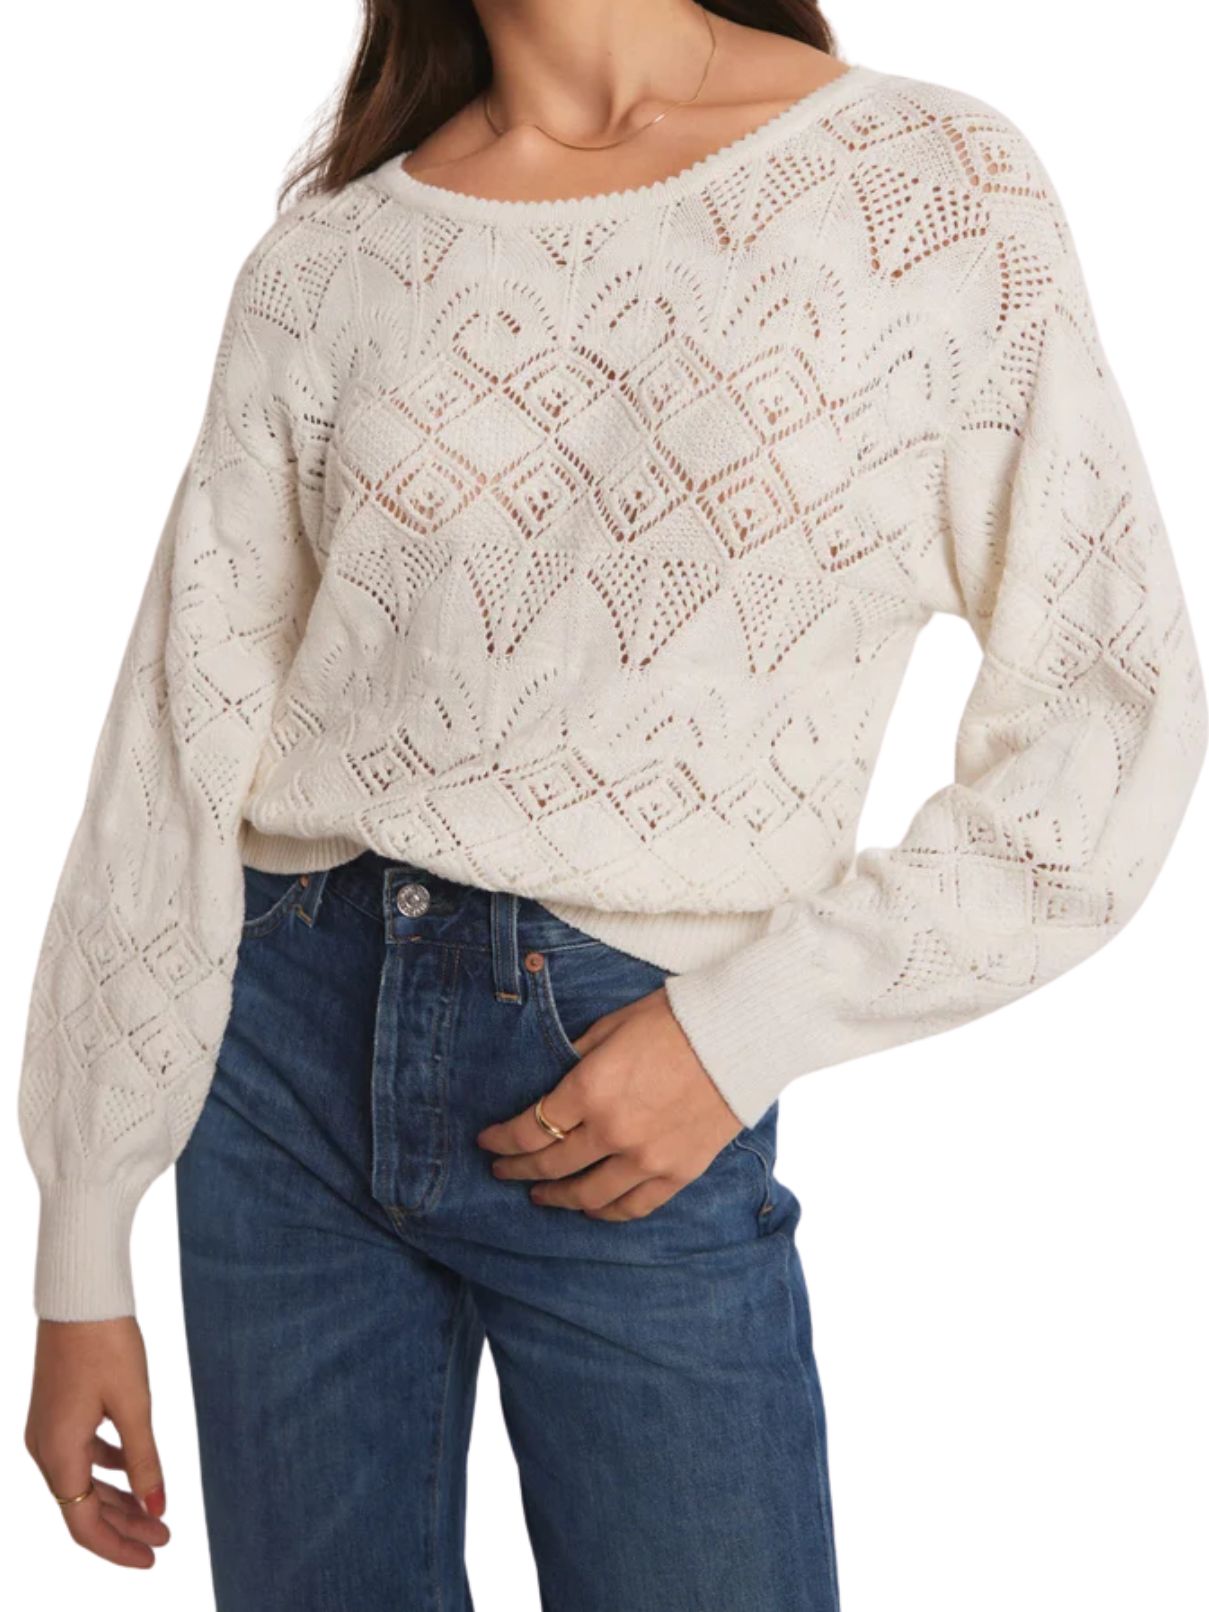 Z Supply Kasia Sweater in White | Cotton Island Women's Clothing Boutique